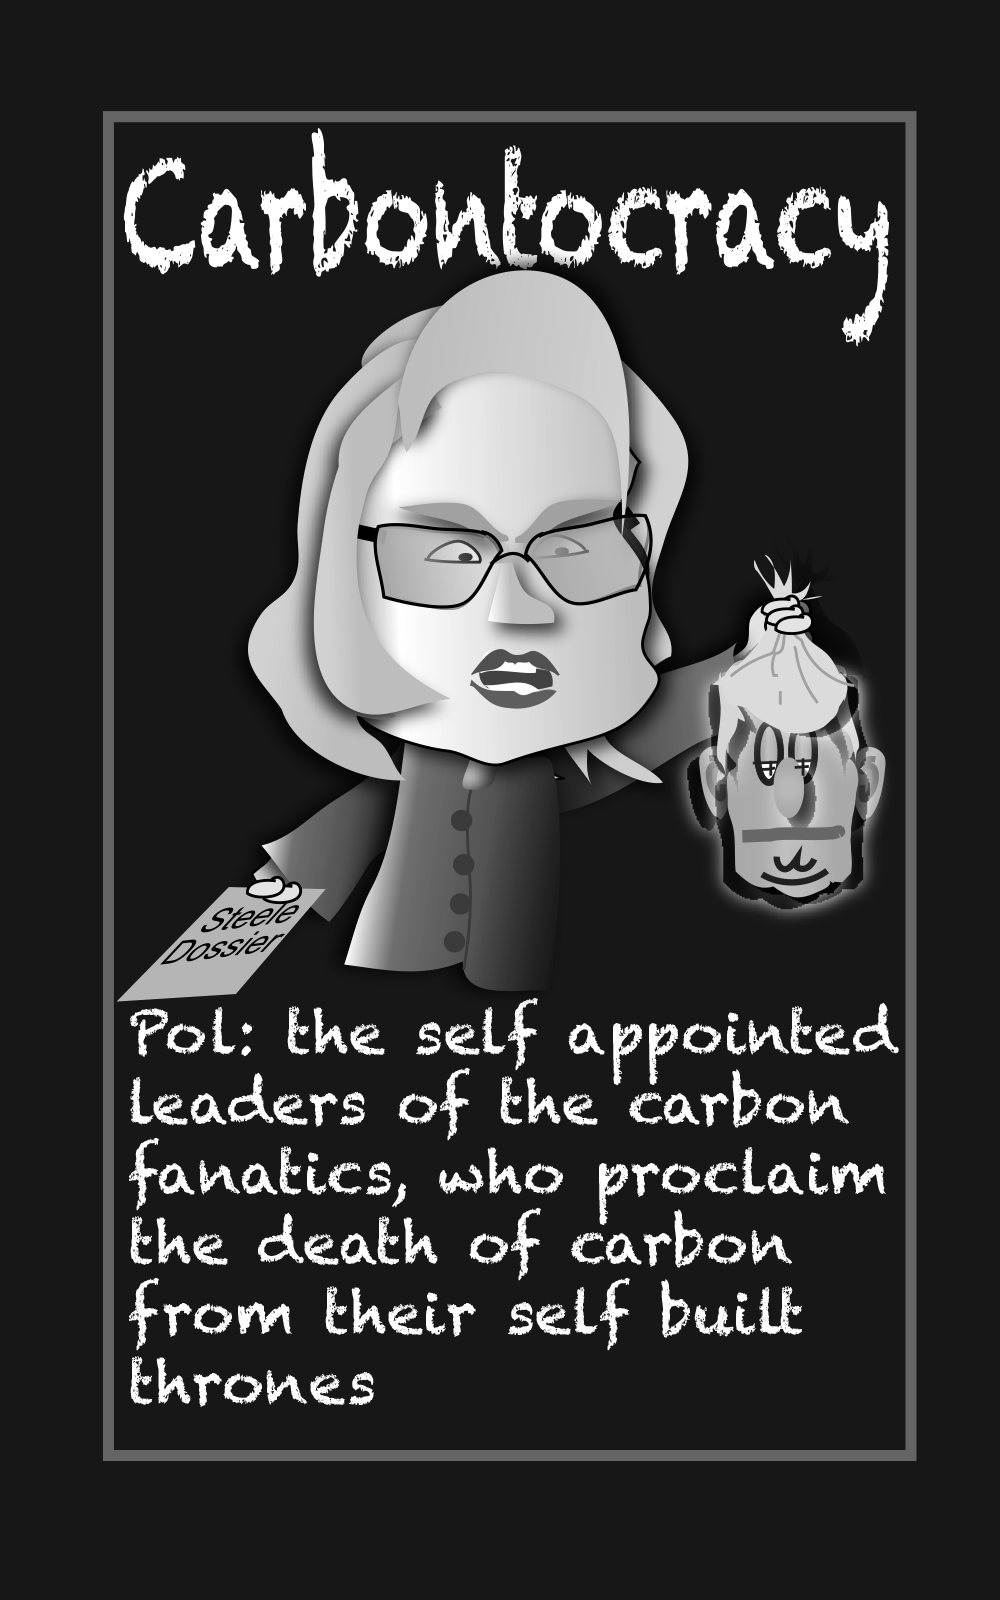 Hillary in Book of Carbon